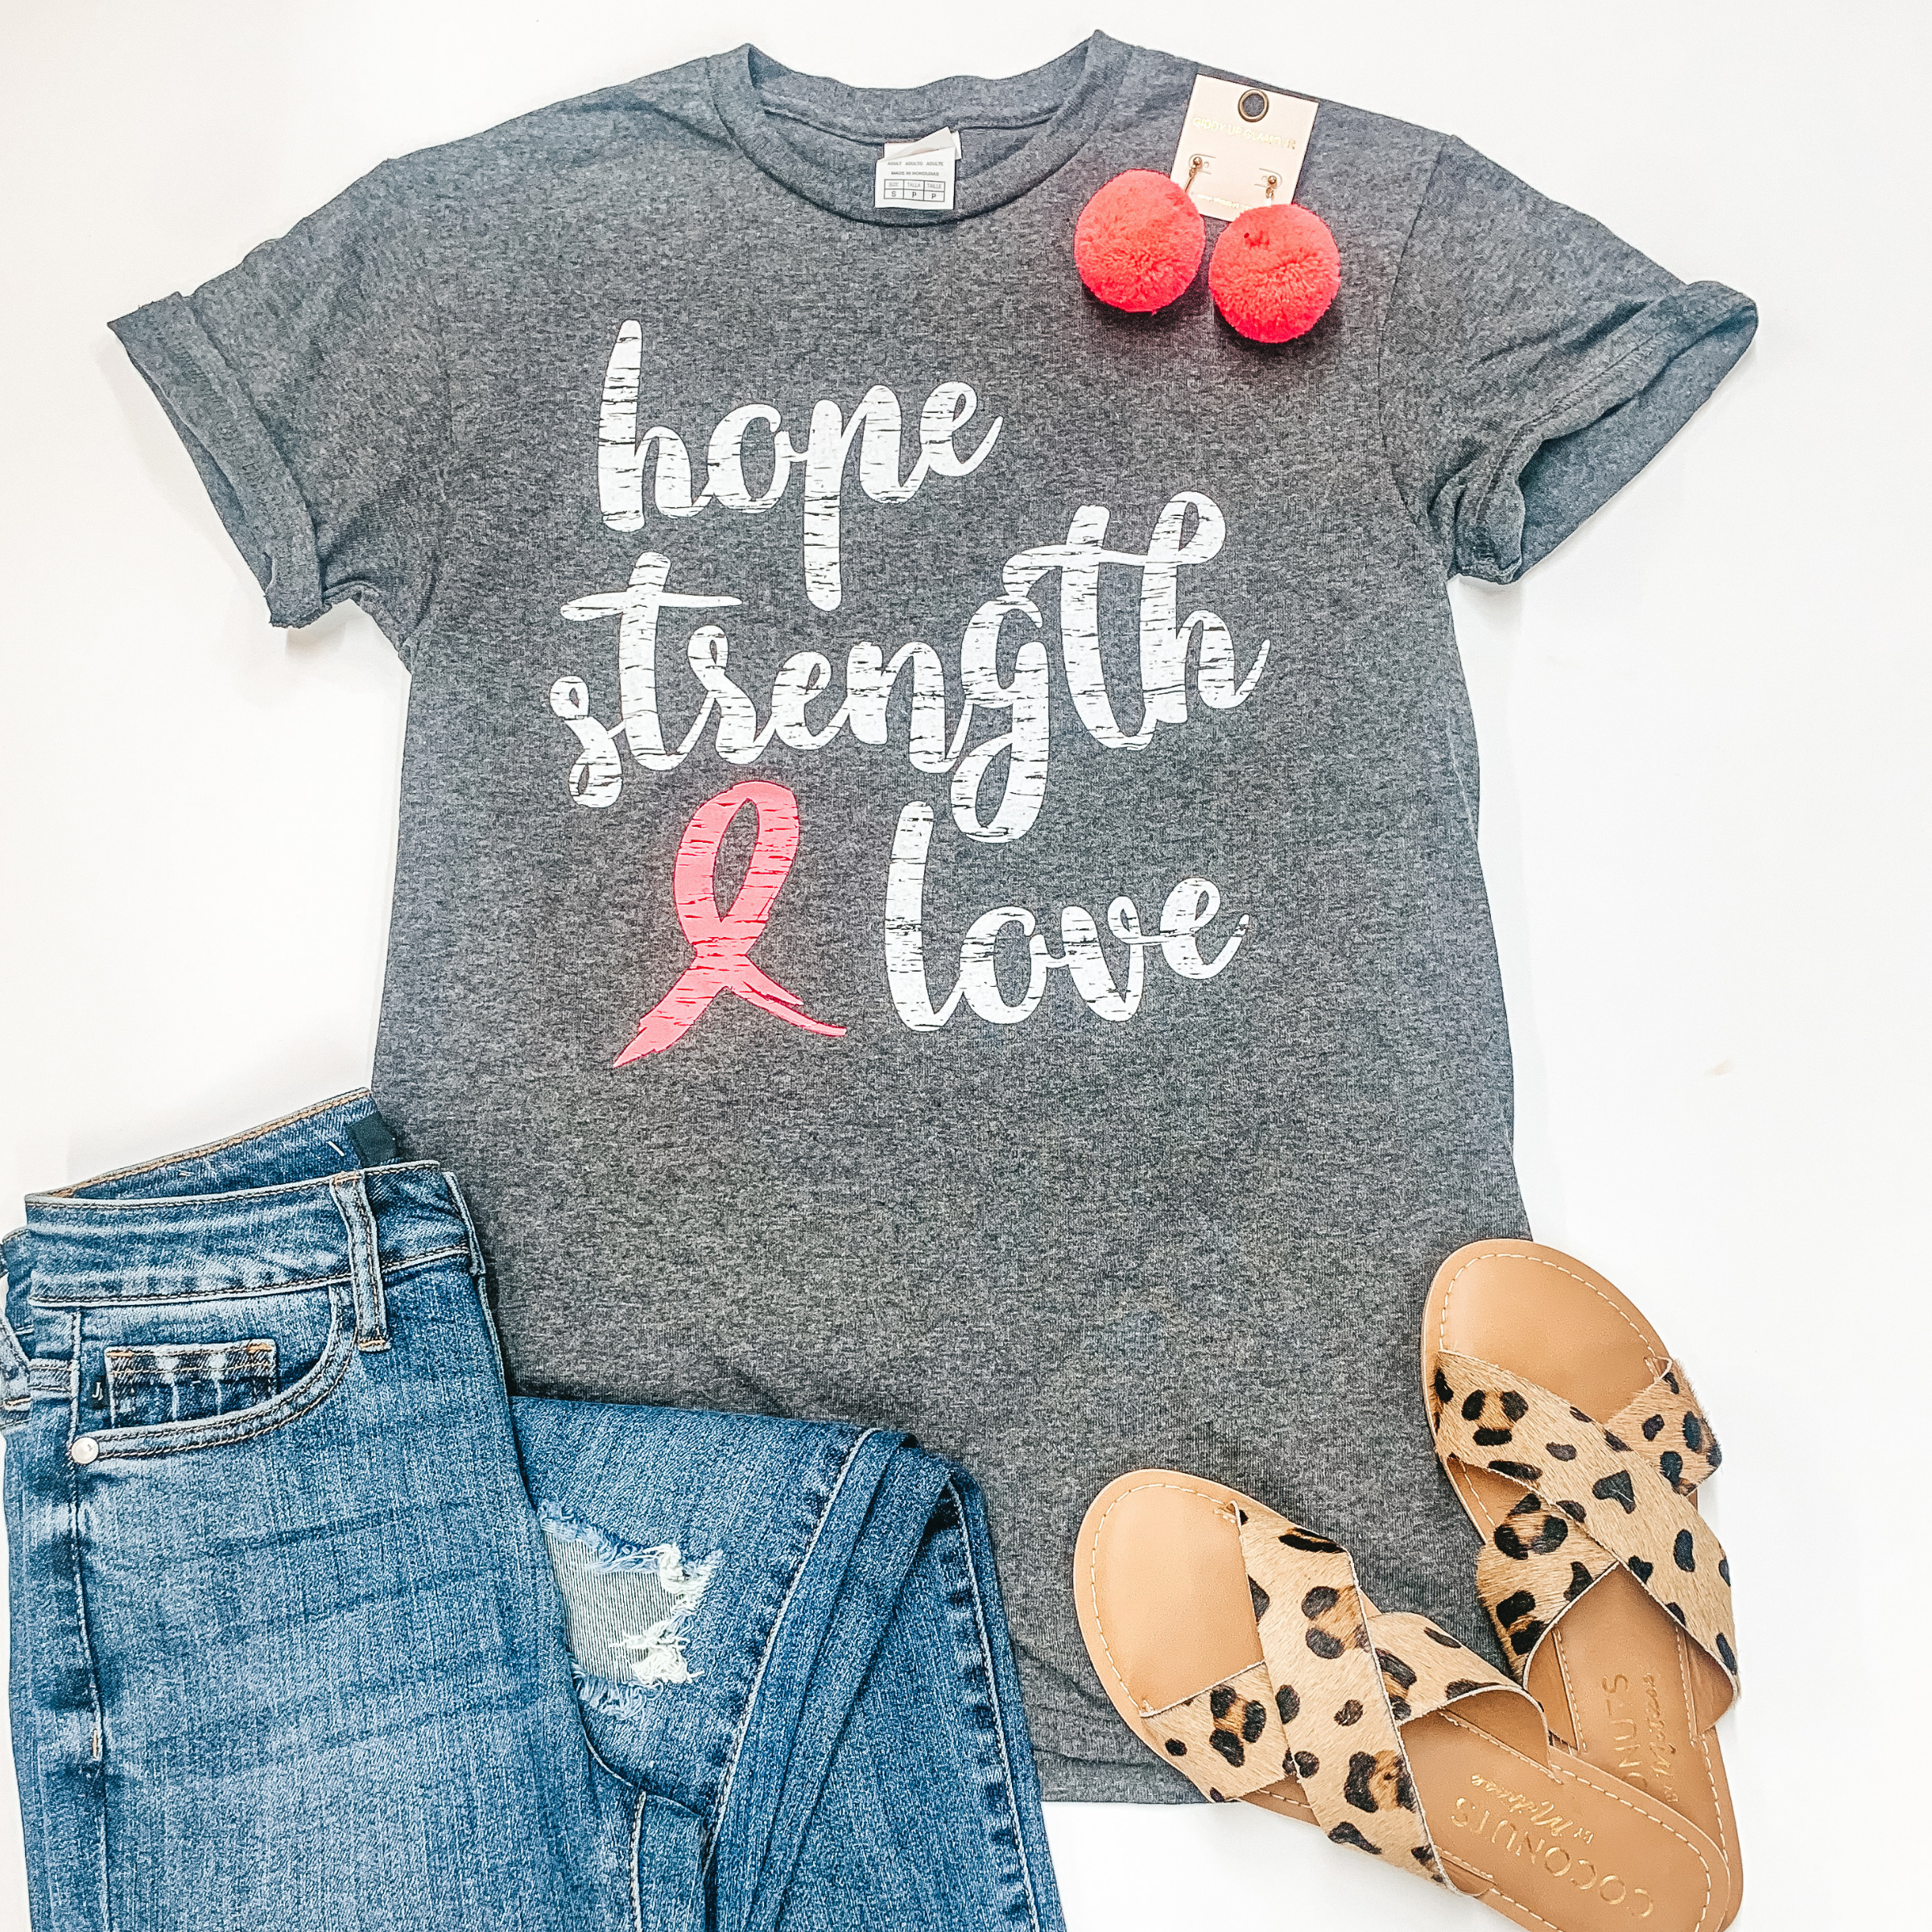 Hope, Strength, and Love Short Sleeve Graphic Tee in Grey - Giddy Up Glamour Boutique